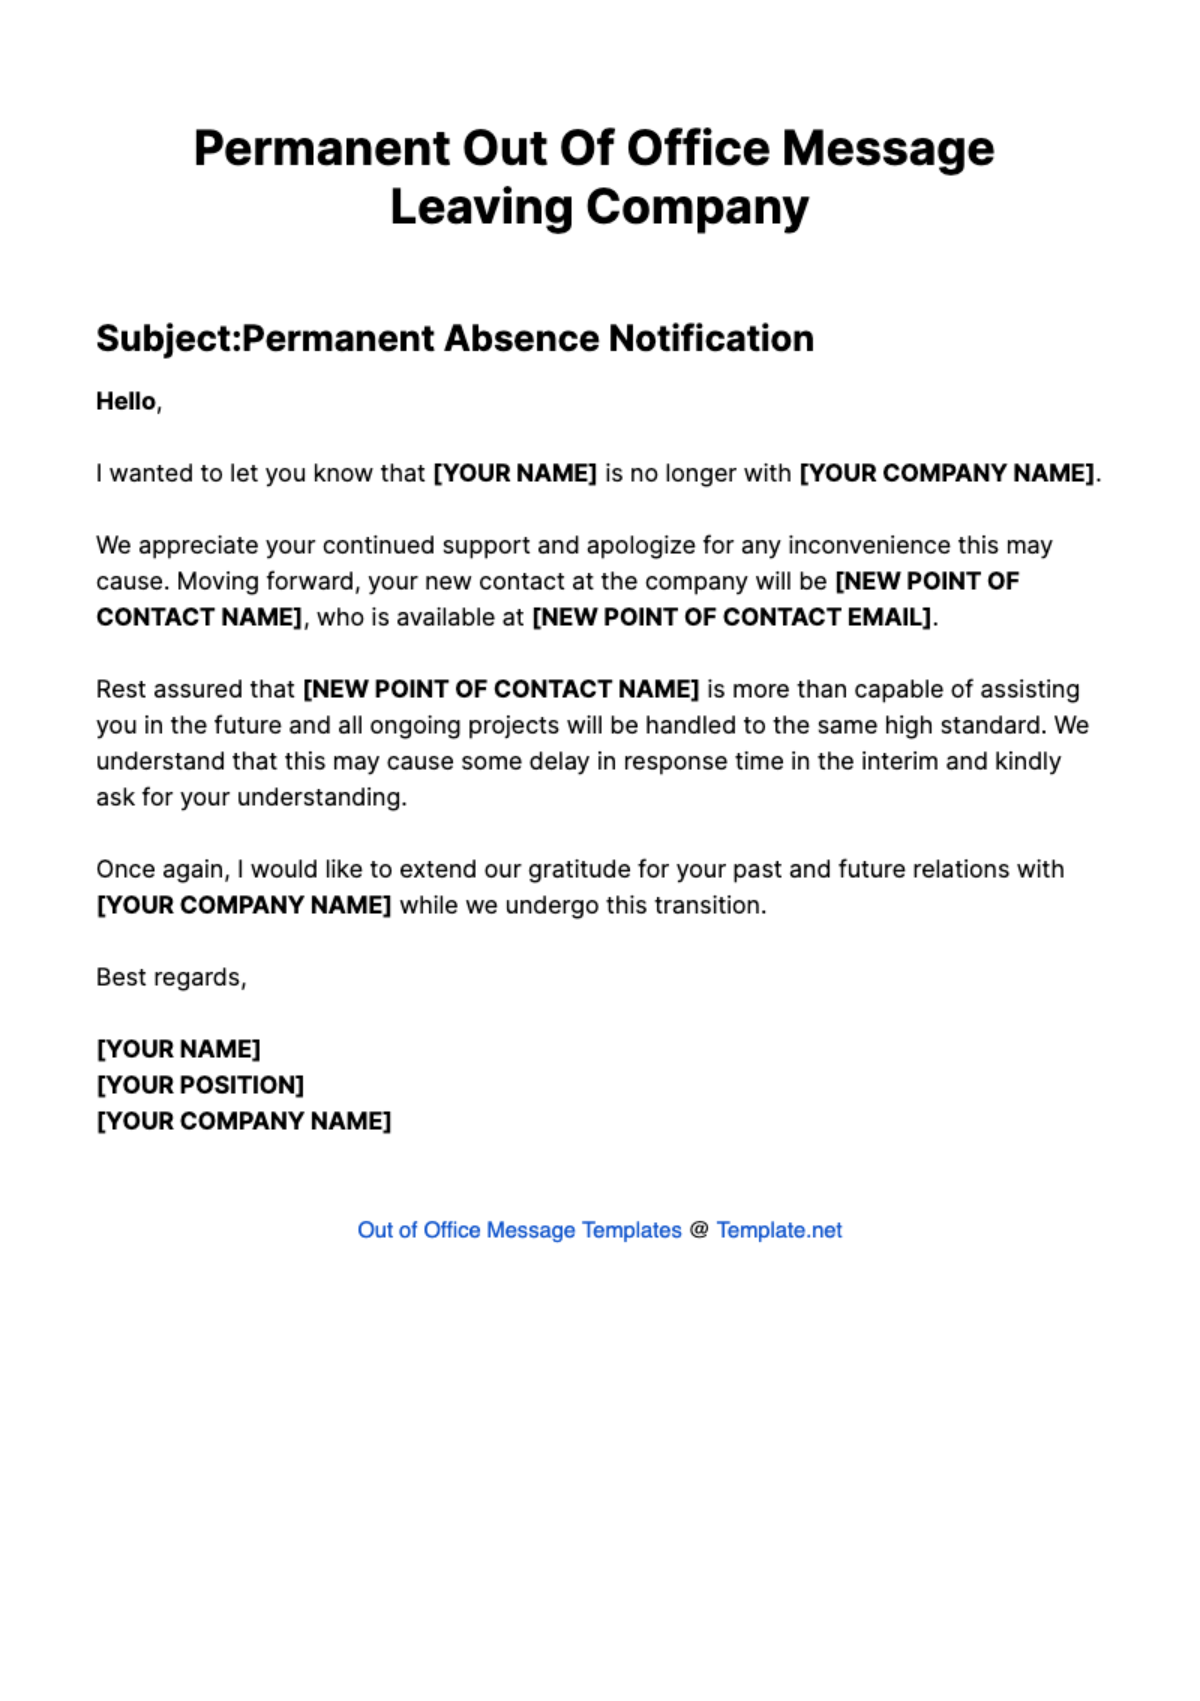 Permanent Out Of Office Message Leaving Company Template